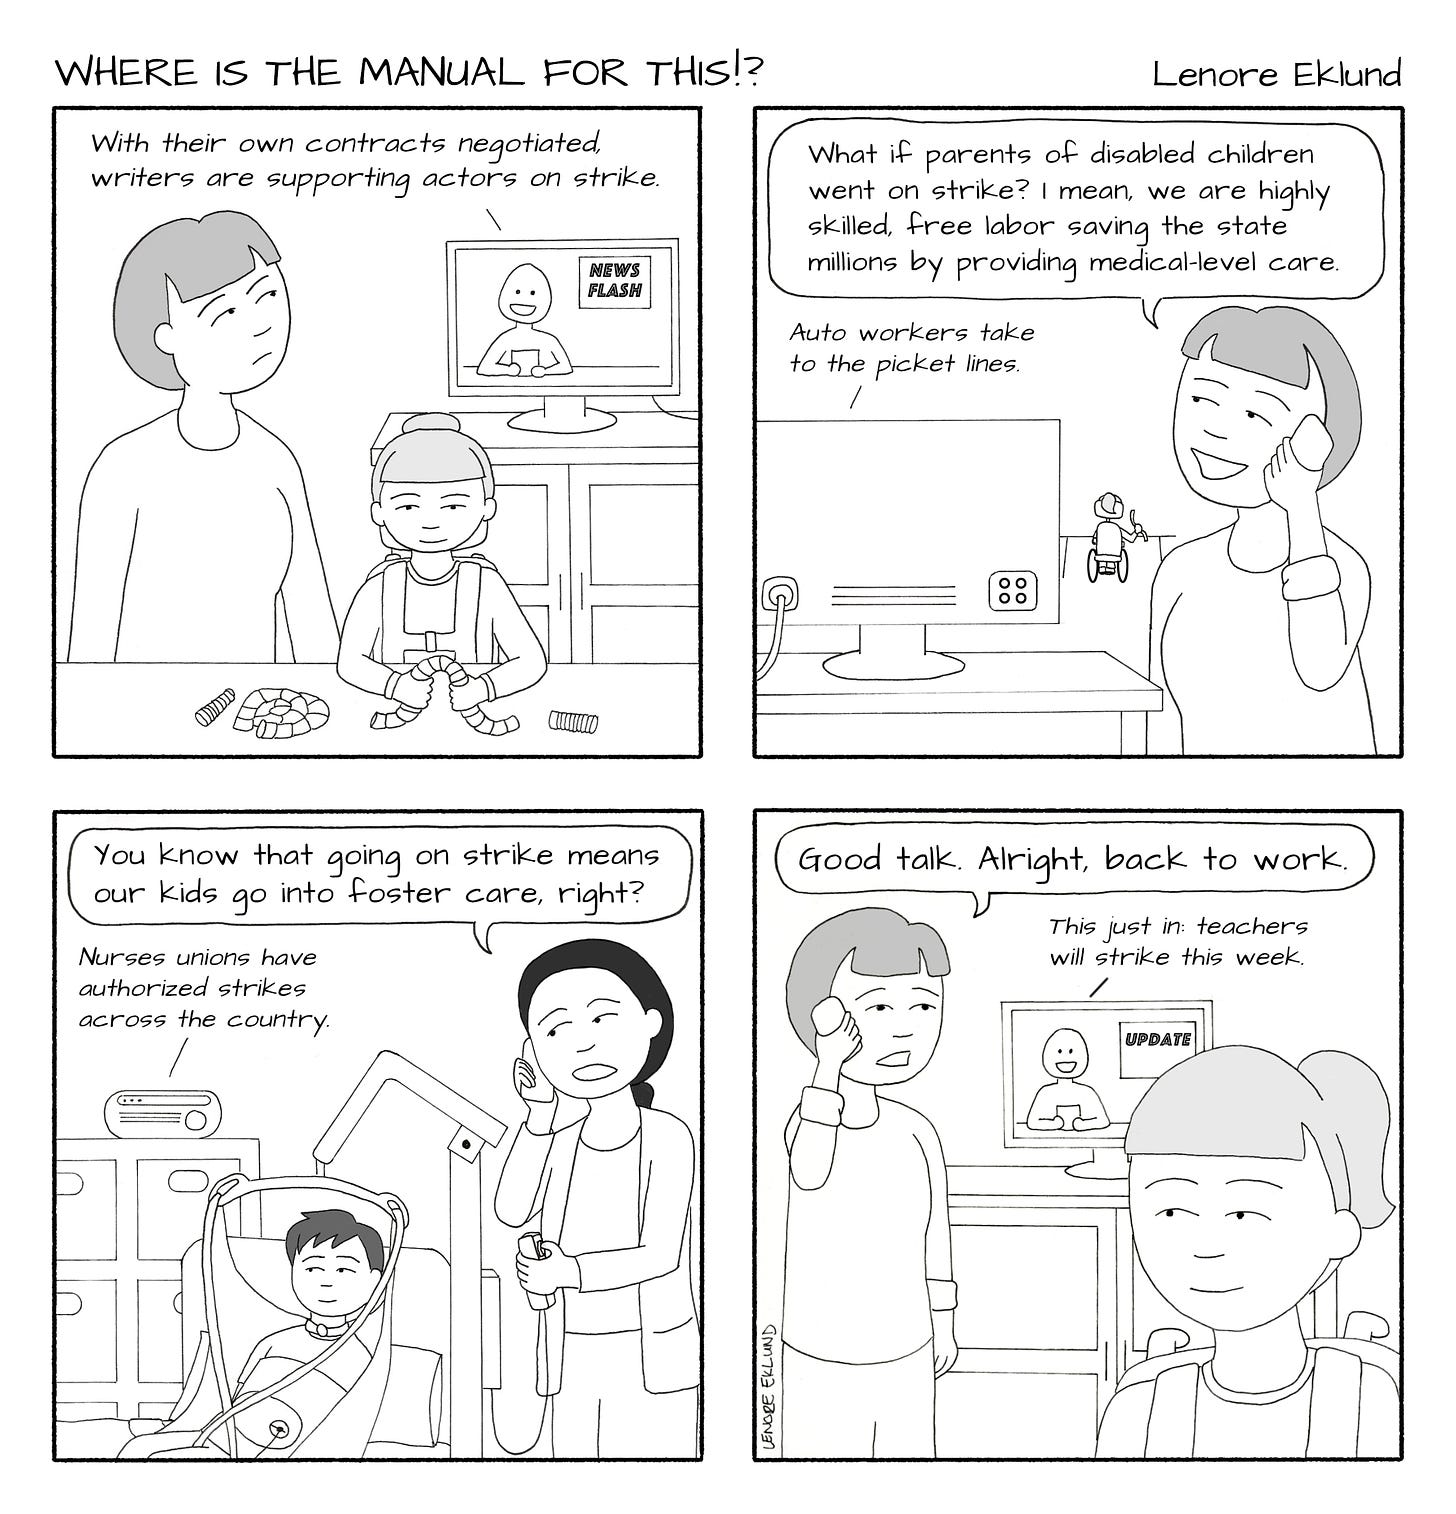 A four-panel line drawing called Where is the Manual for This?! by Lenore Eklund. In the first panel, a mom watches the news while her daughter in a wheelchair plays with a bendy toy. The anchor says “With their own contract negotiated, writers are supporting actors on strike.” In the second panel, the mom is on the phone while her daughter is in the background. “What if parents of disabled children went on strike?” she says. “I mean, we are highly skilled, free labor, saving the state millions by providing medical-level care.” In the background the TV continues: Auto workers take to the picket lines.” In the third panel, another mom on the phone replies: “You know that going on strike means our kids go into foster care, right?”  The mom’s son hangs in a lift system while the radio news says: “Nurses unions have authorized strikes across the country.” In the fourth panel, the first mom replies: “Good talk. Alright, back to work.” The TV news continues: “This just in: teachers will strike this week.”